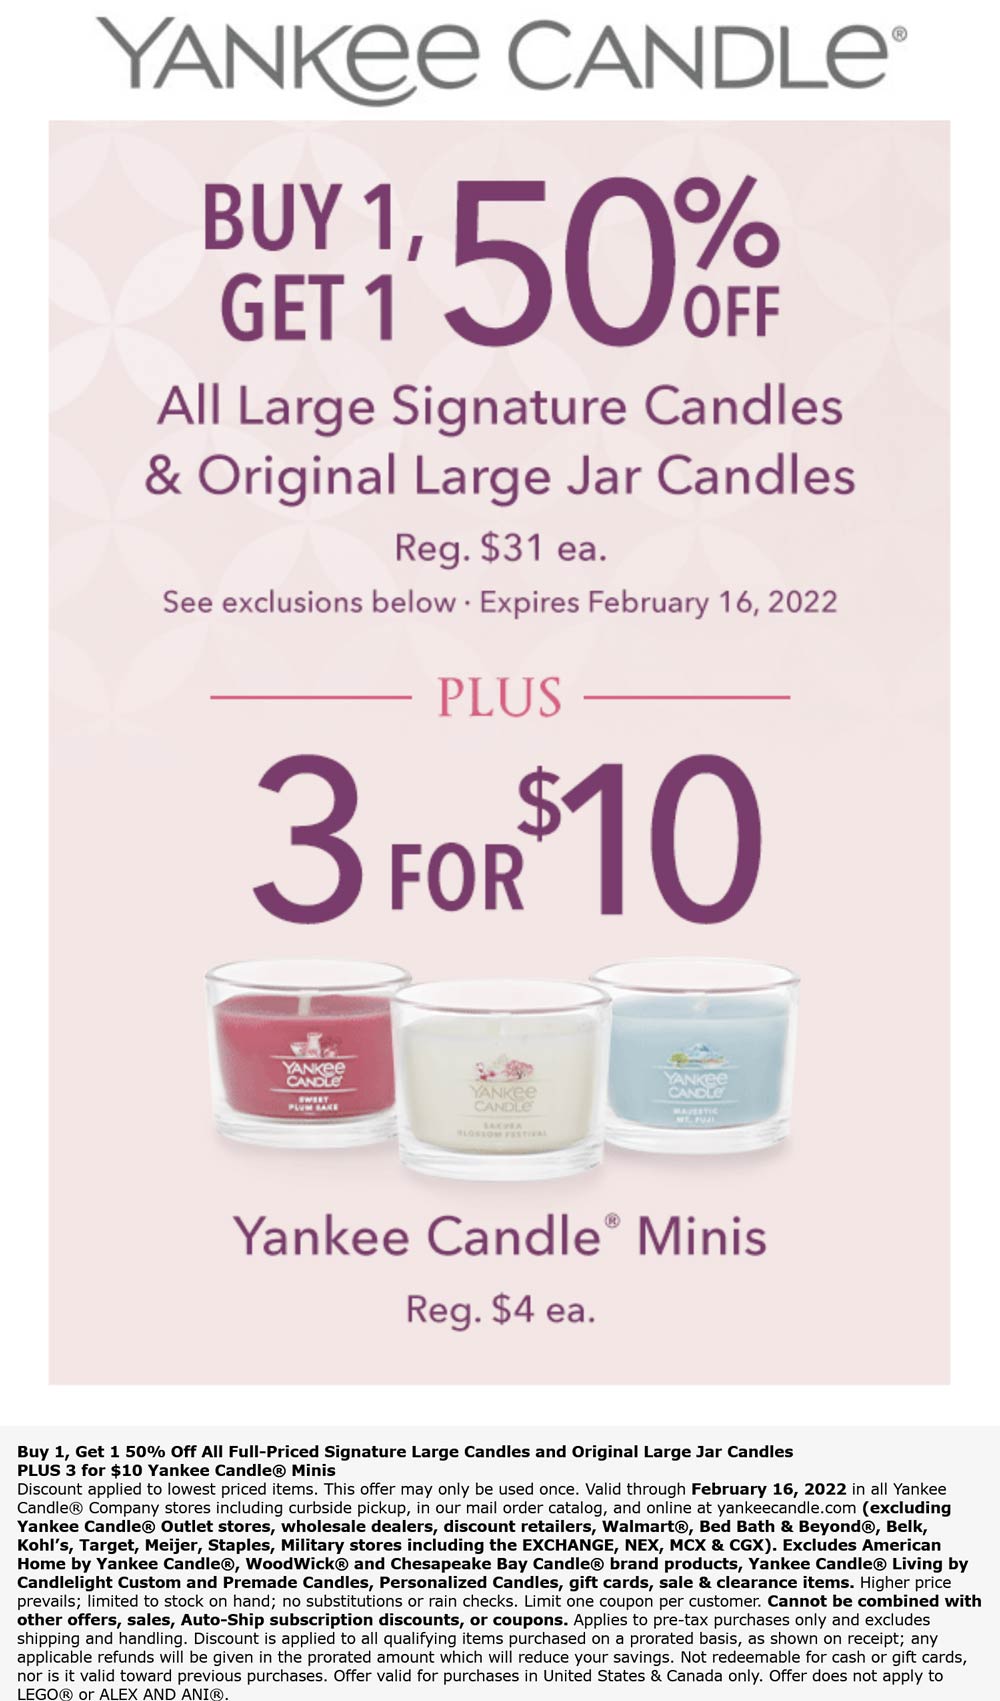 Yankee Candle stores Coupon  Second large candle 50% off & 3 for $10 on minis today at Yankee Candle, ditto online #yankeecandle 